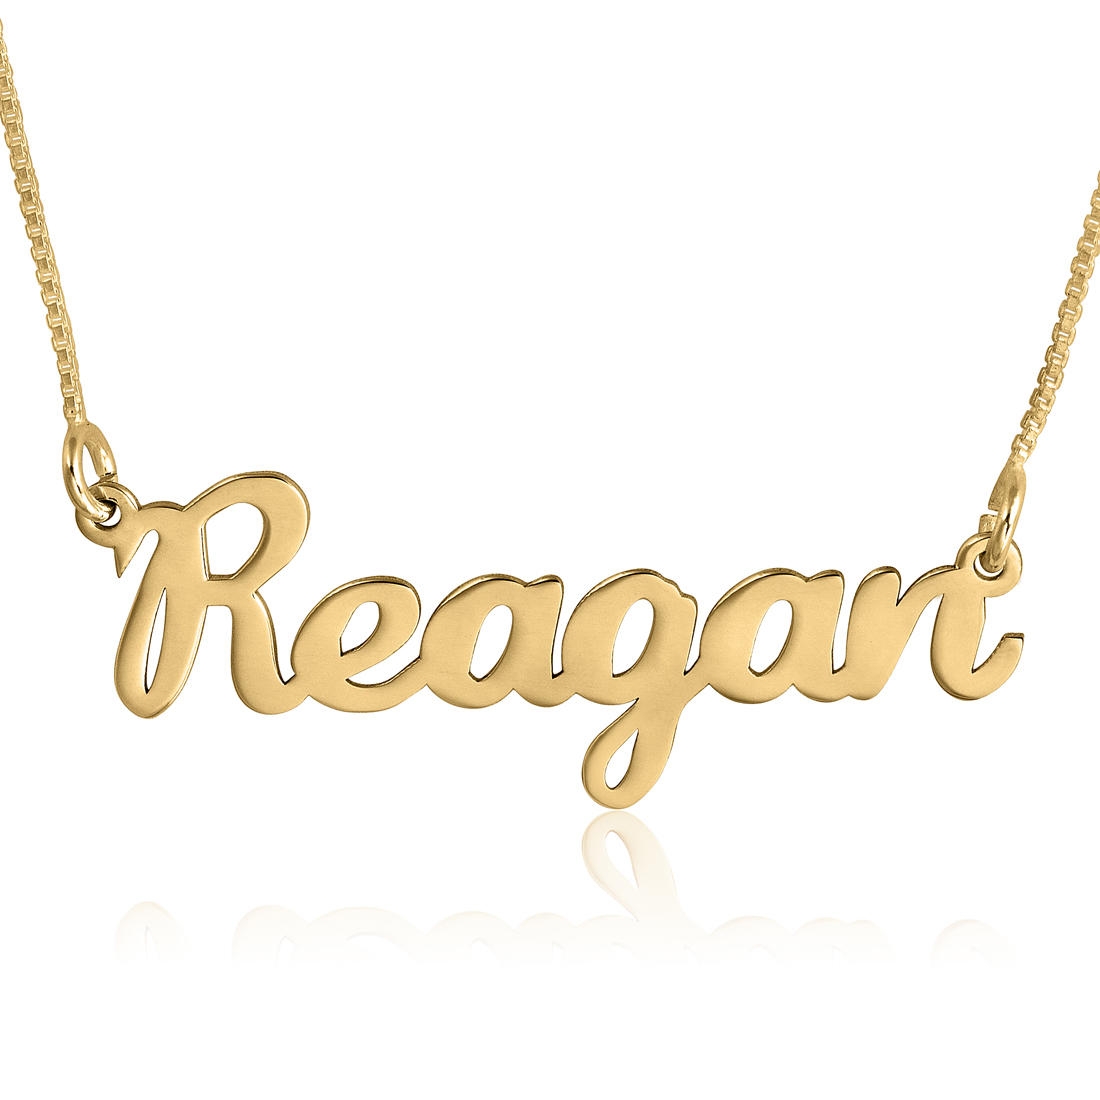 Name Necklace, 24k Gold Plated, Reagan Brush Script  - 1